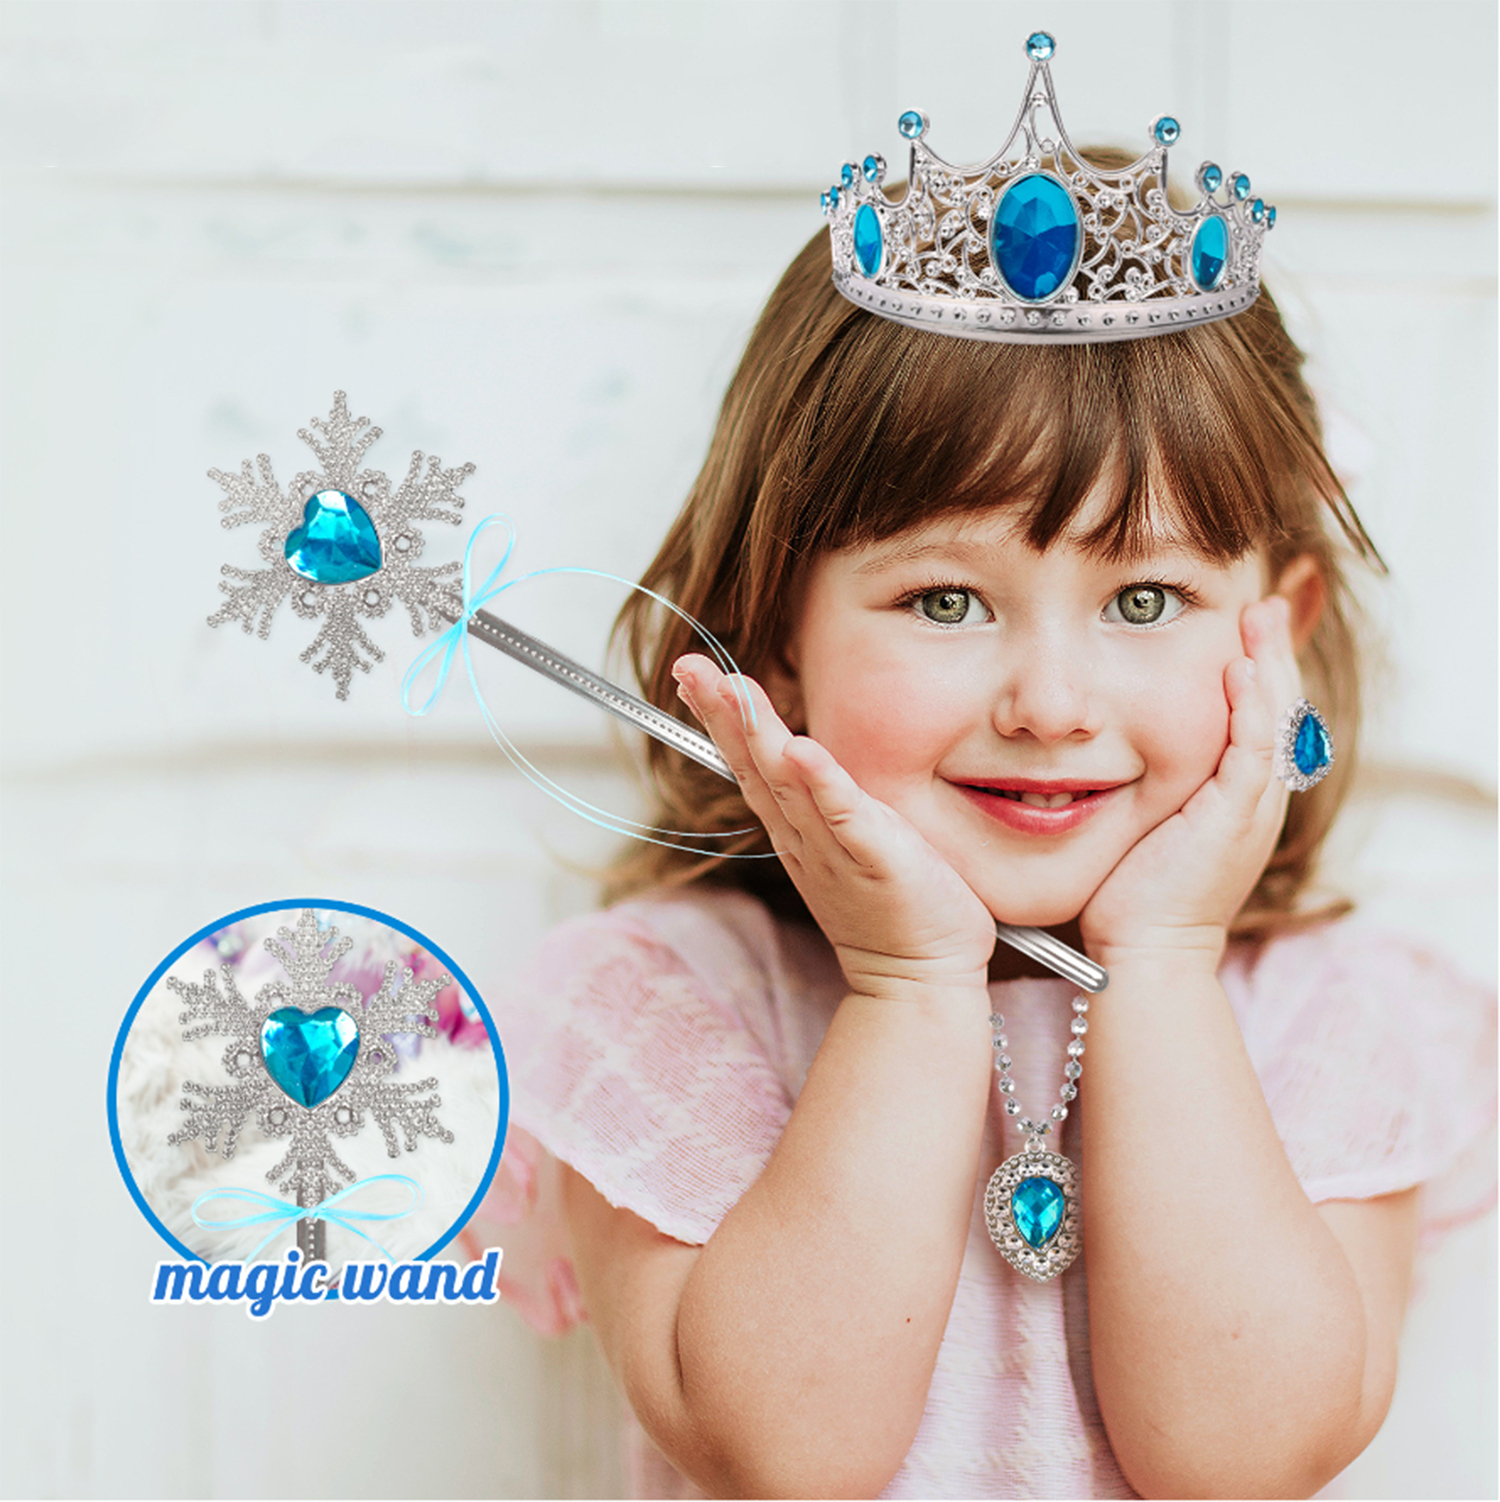 AOXTOY Dress-up Cosplay Toys for Girls, Princess Dress Up Clothes Cape Skirt Set, Pretend Play Princess Dress Cloak Jewelry Crown Wand - image 2 of 5